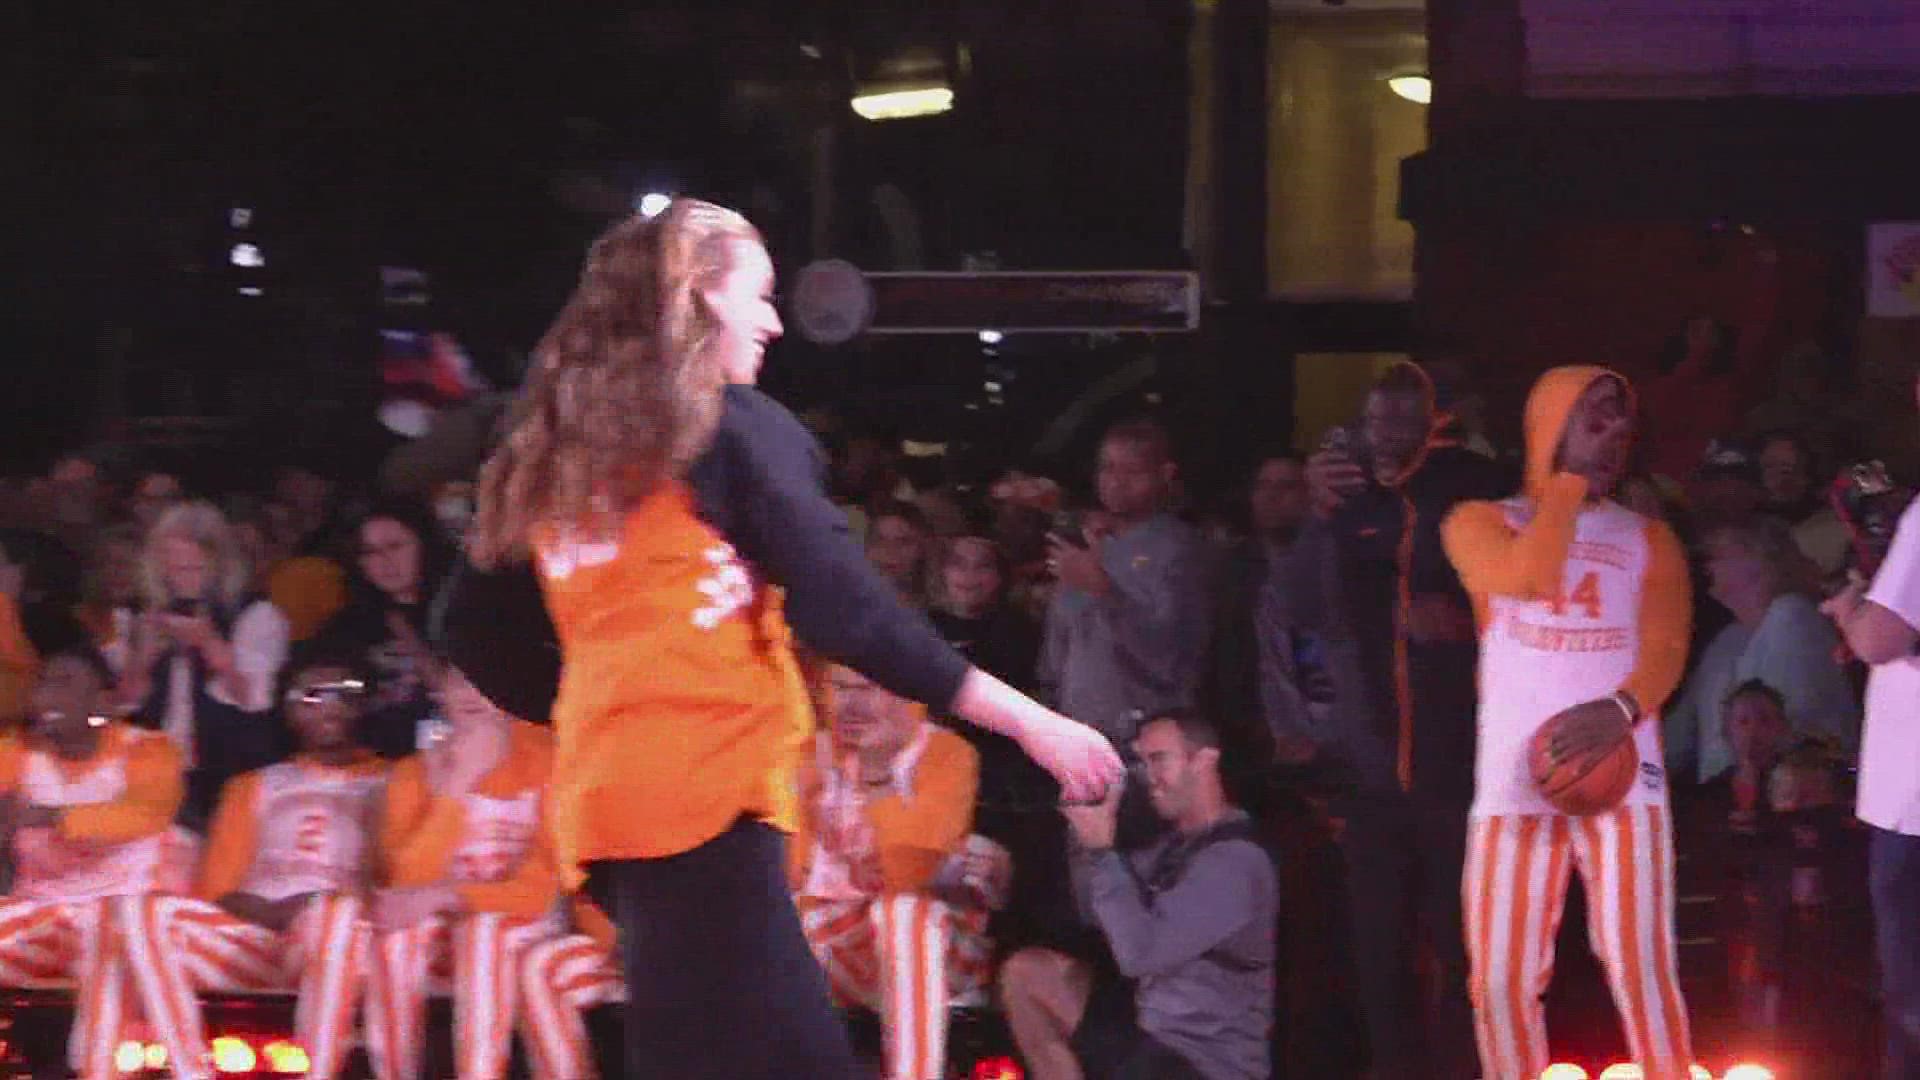 The Vols and Lady Vols held the event in downtown Knoxville to connect with fans ahead of the season.